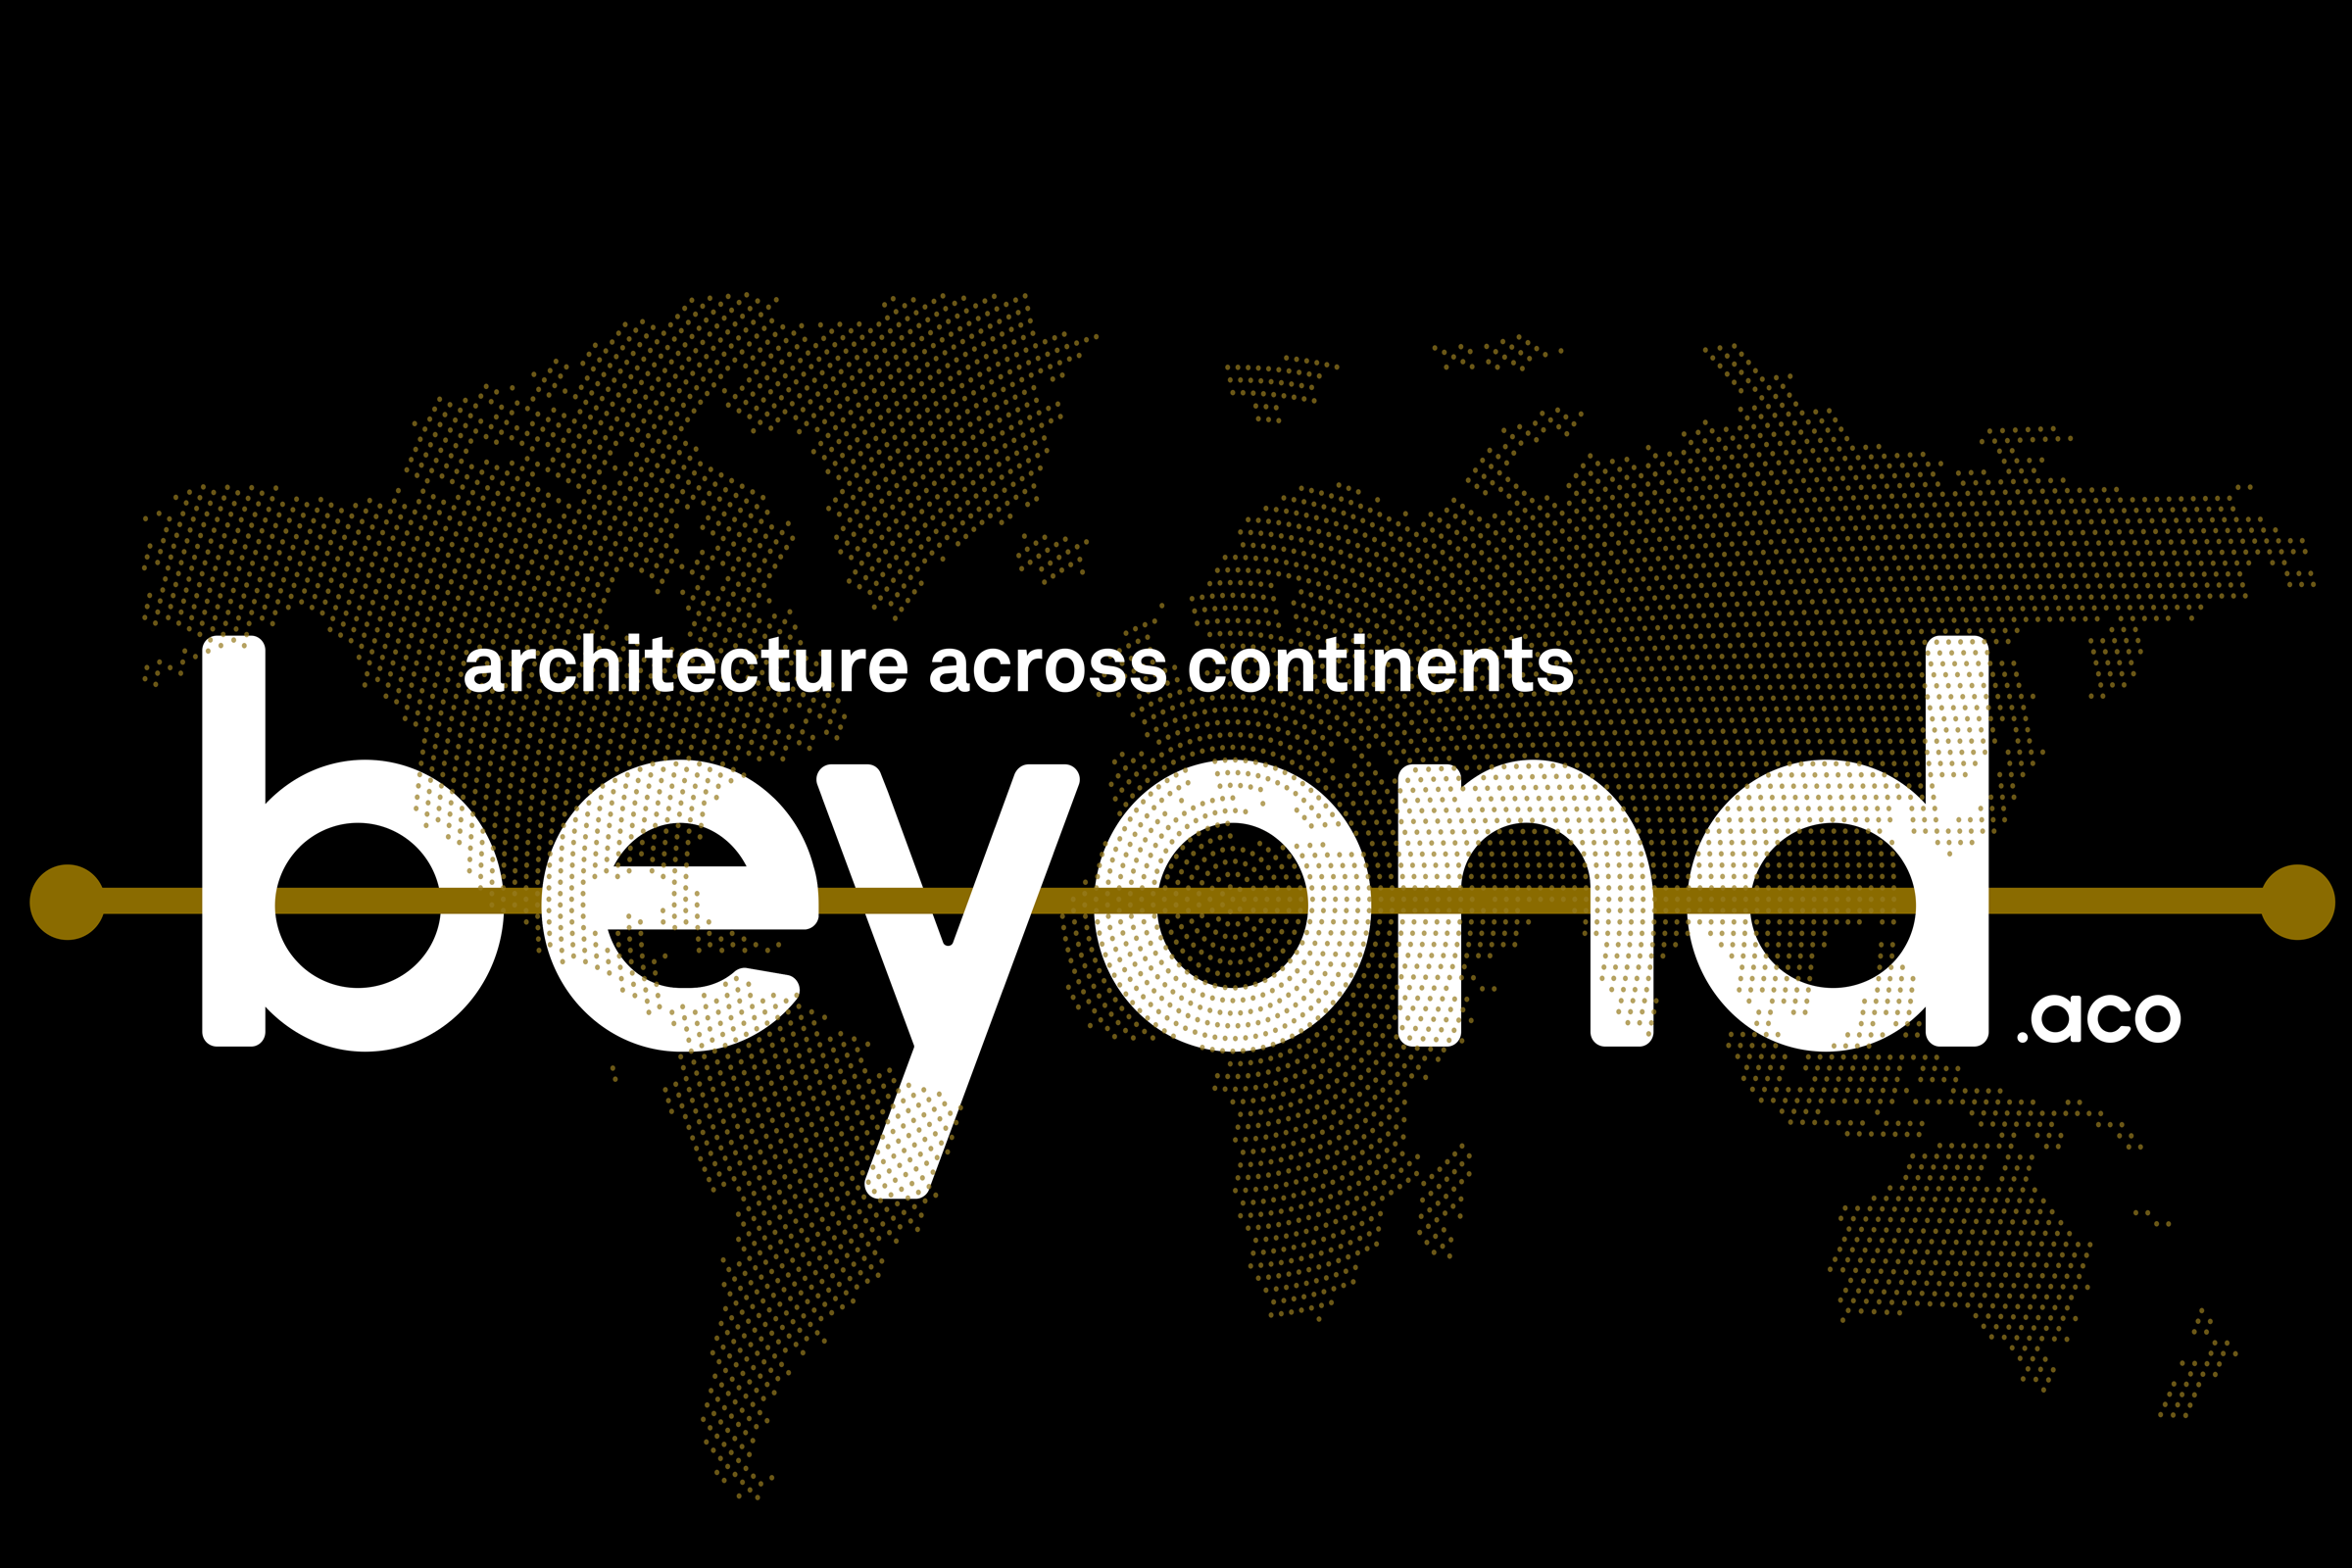 Join ACO, Inc.’s “beyond.aco: architecture across continents” Virtual Event Series